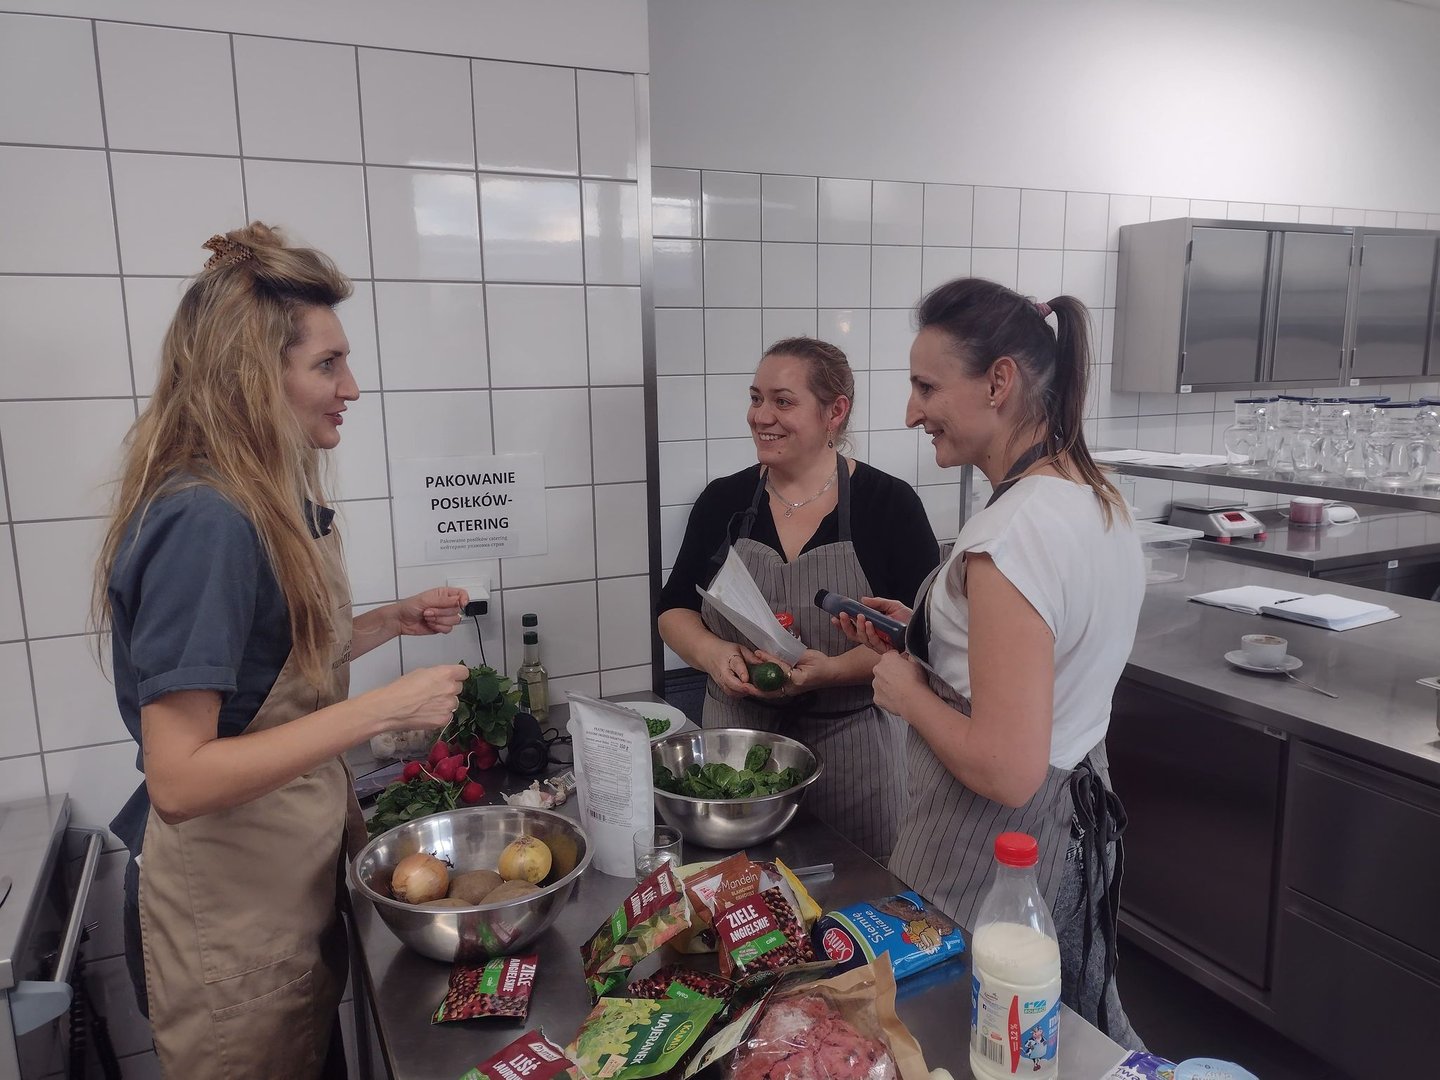 Training in the City of Rybnik for plant-based cooking. Implementing the tool "Organizing training for plant-based cooking".